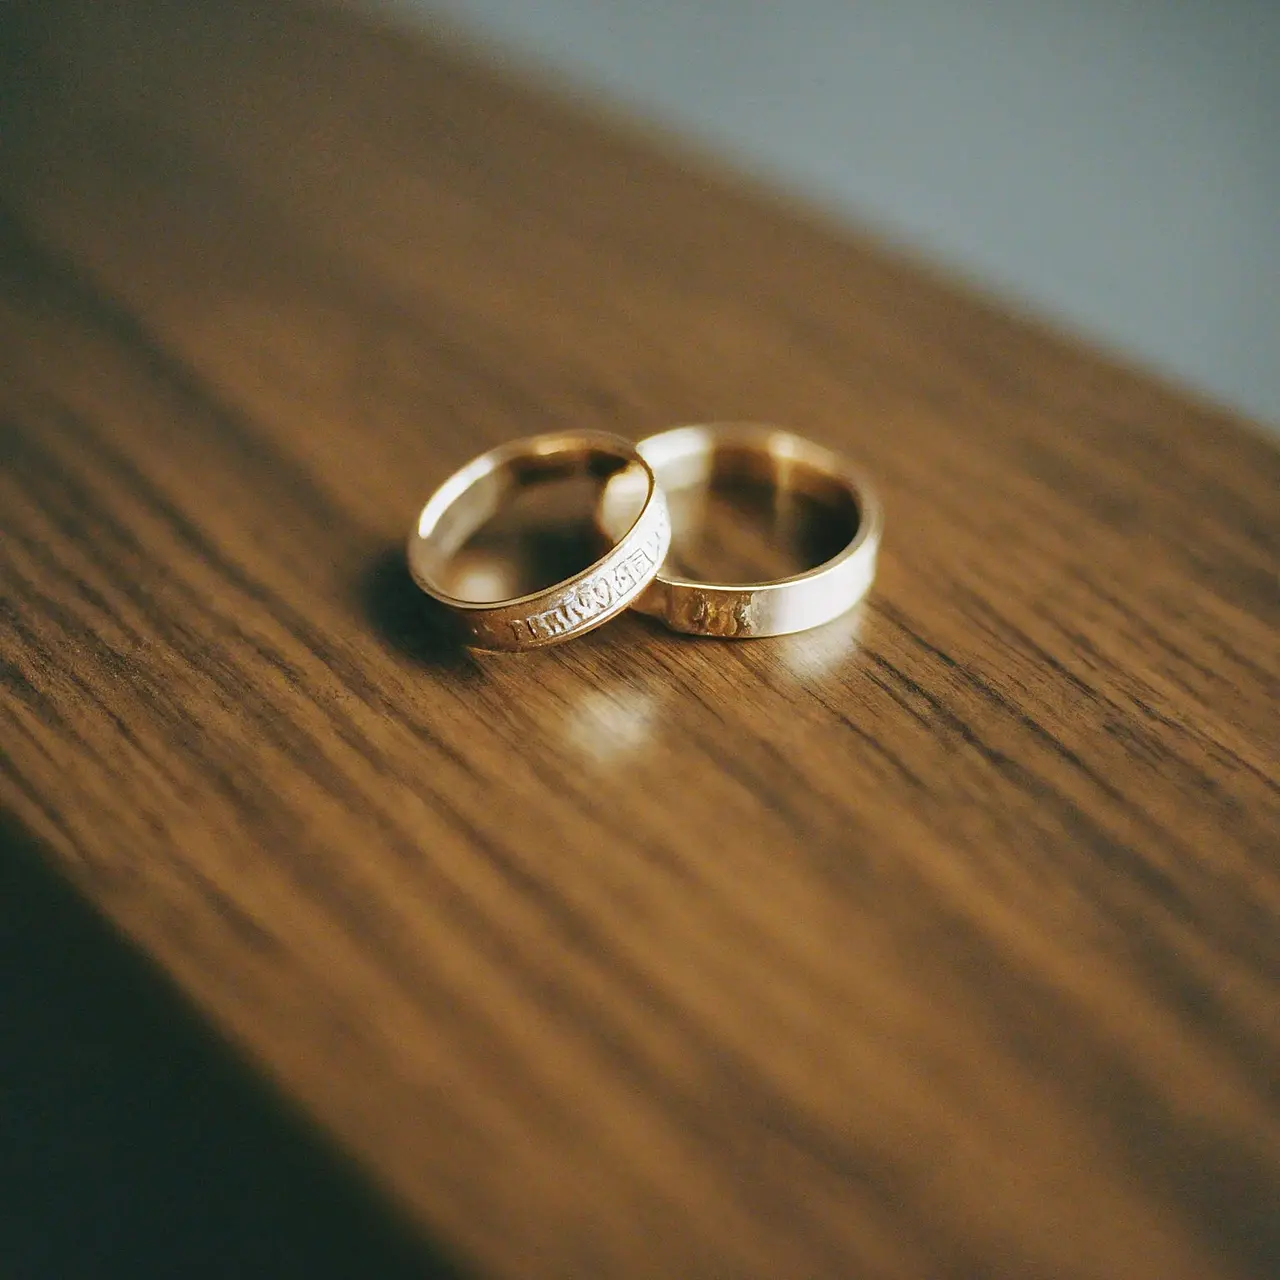 Two custom wedding bands on a wooden surface. 35mm stock photo